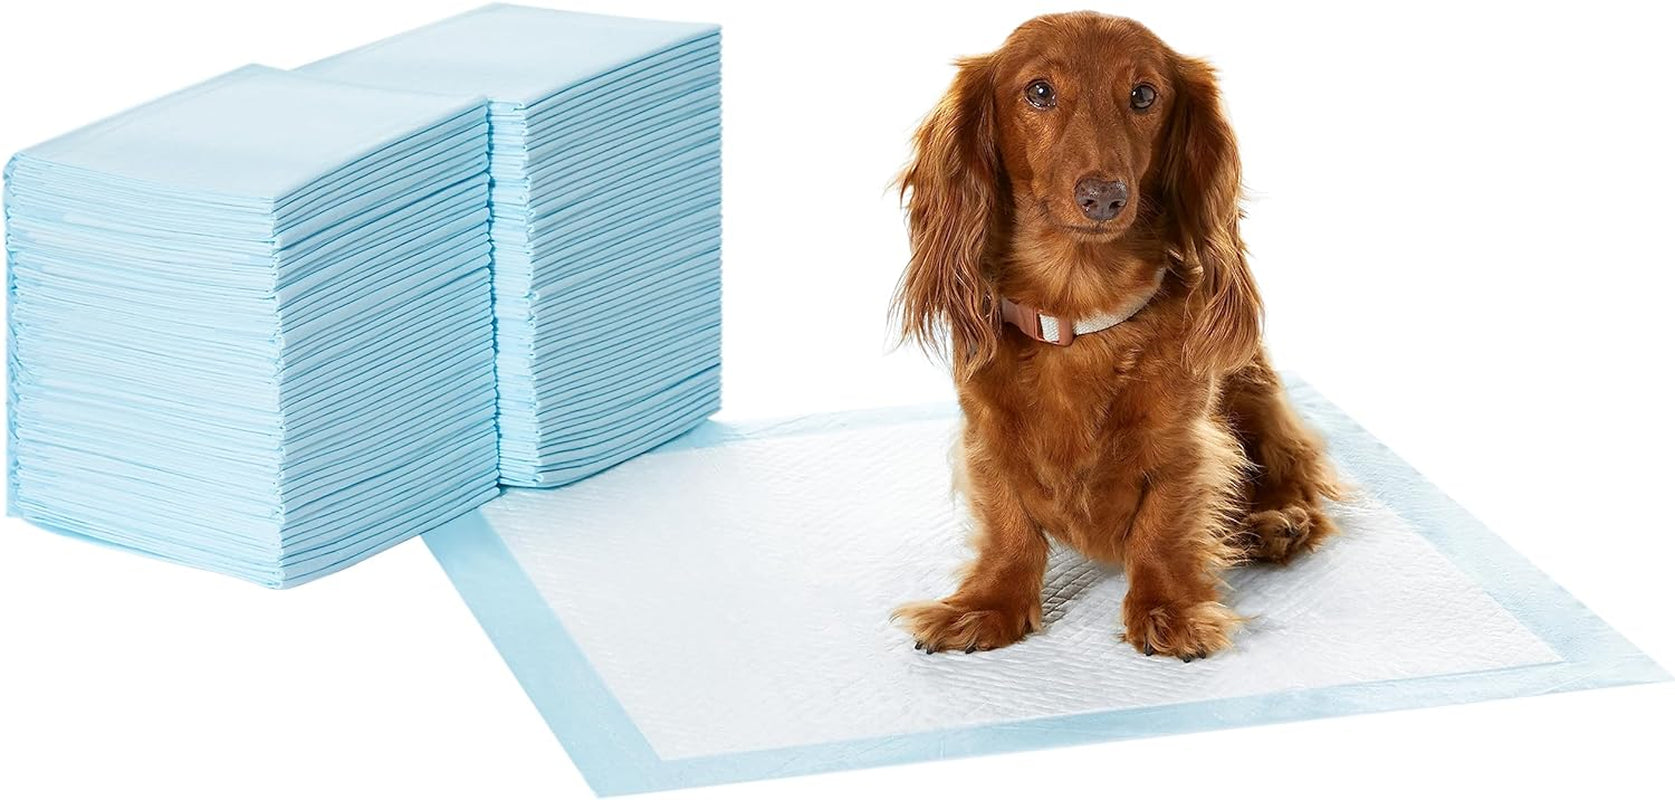 Dog & Puppy Pee Pads - Leak-Proof, Quick-Dry, Potty Training Essentials - 100 Pack